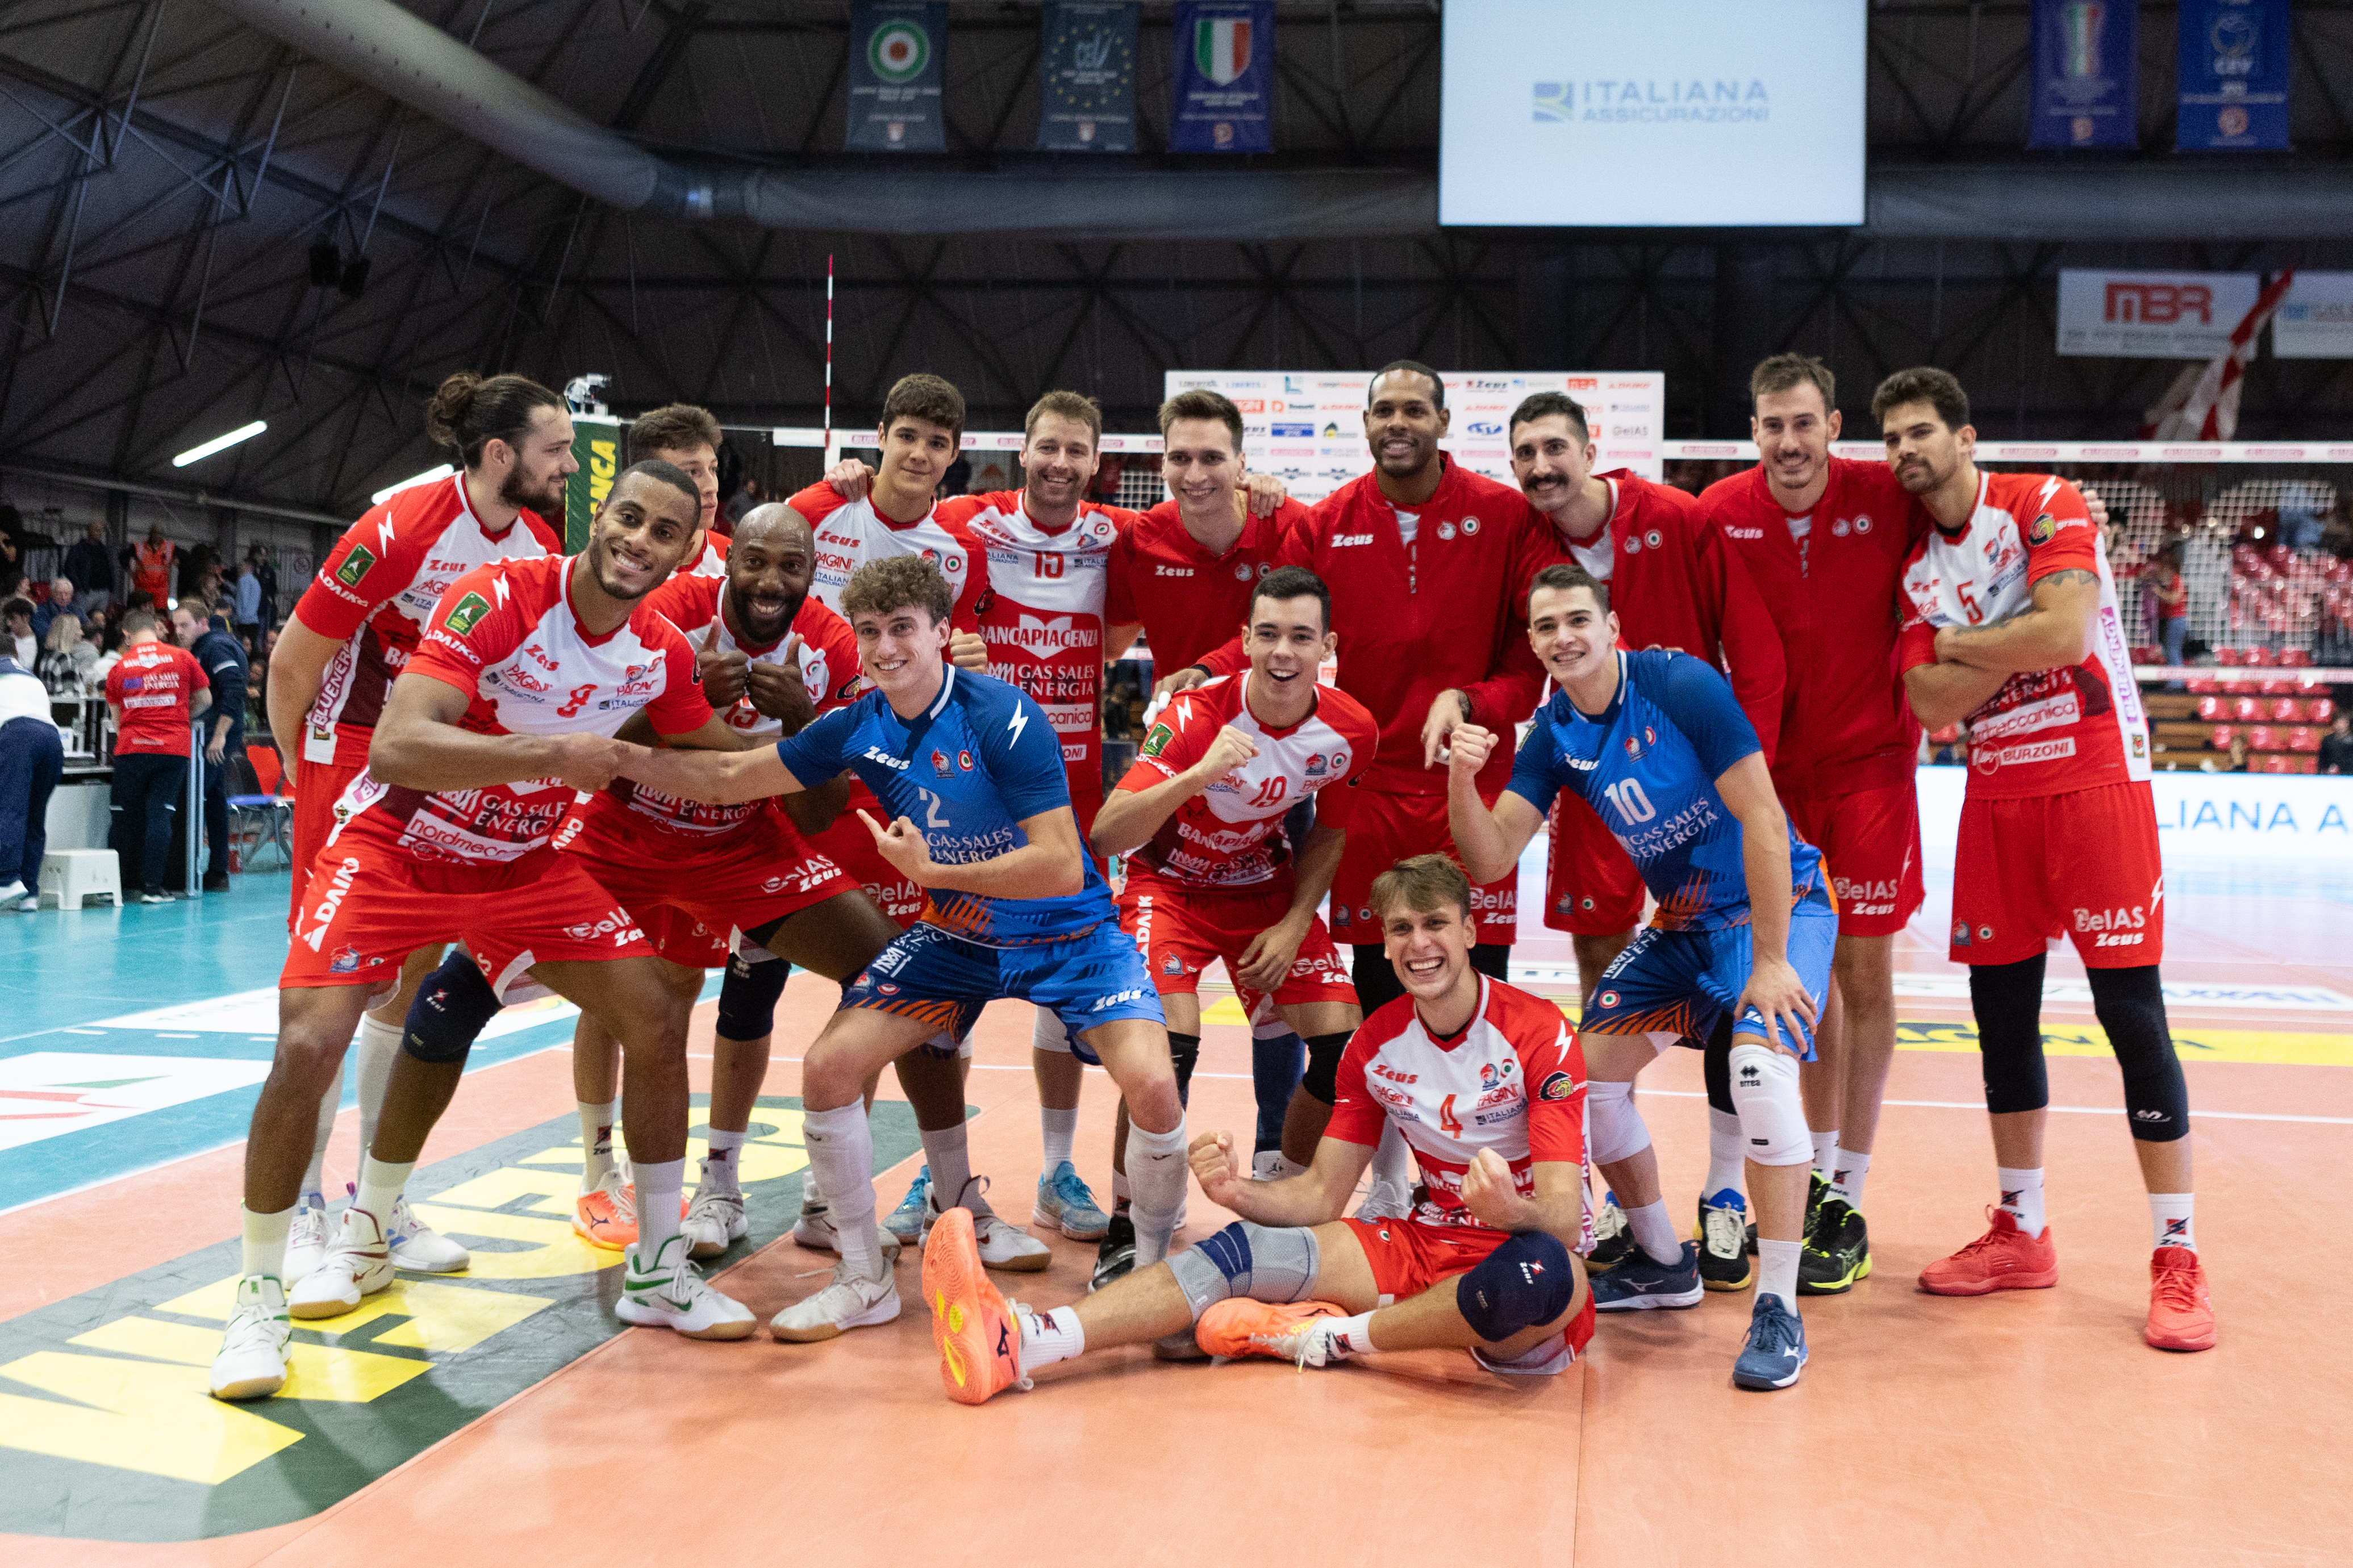 CLVolleyM: Volleyball stars ready to shine again | ChampionsLeague